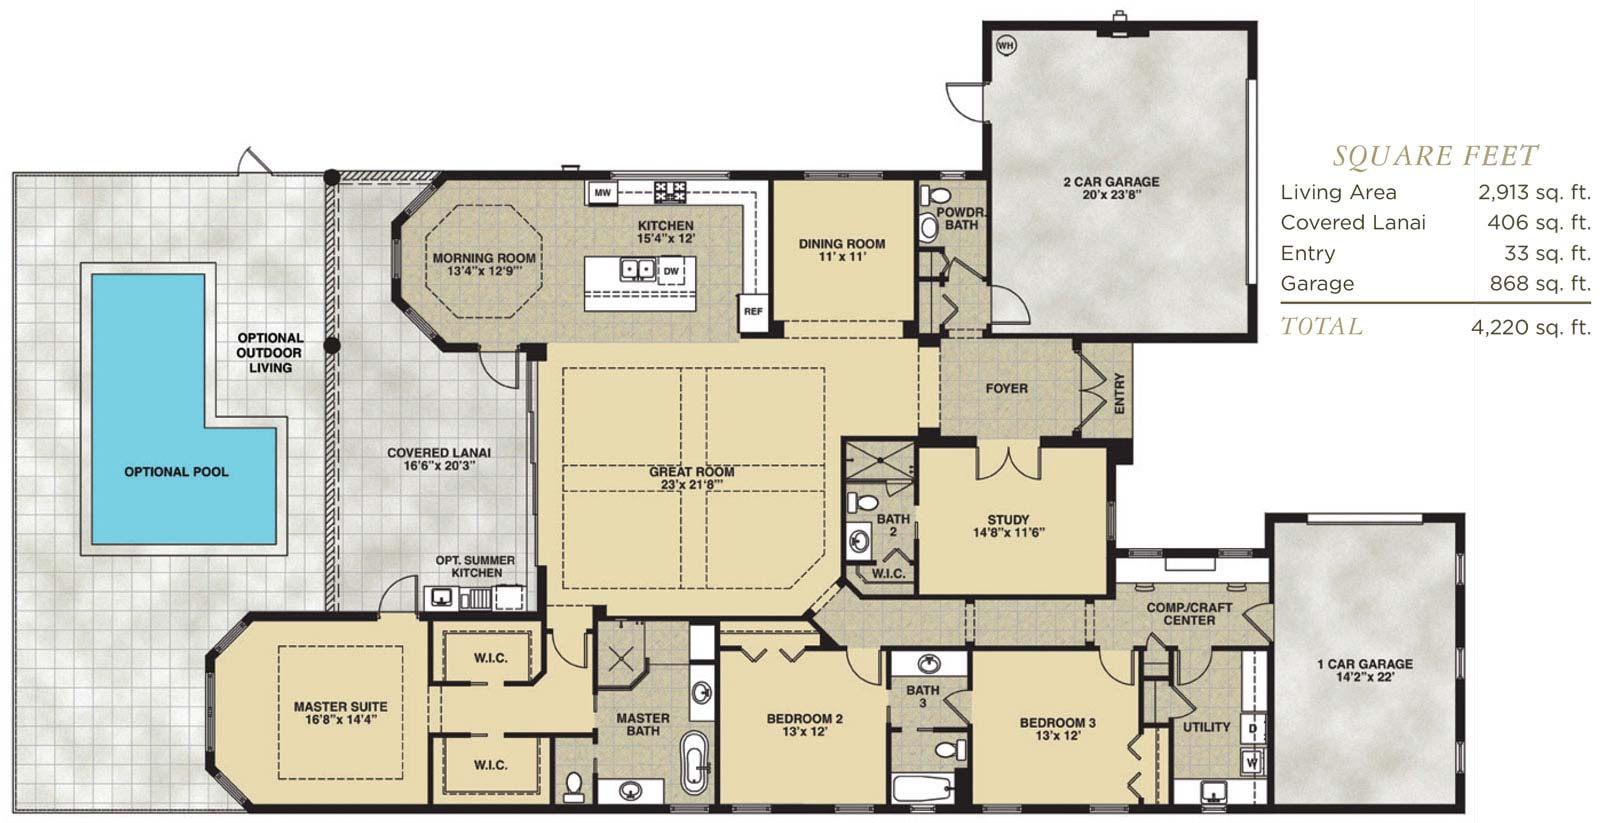 Anastasia Floor Plan in Hidden Harbor Estates, Fort Myers, Stock Construction, Three Bedroom, Three and One Half Bath, Great Room, Dining Room, Study, Covered Lanai, 2-Car Garage and 1-Car Garage